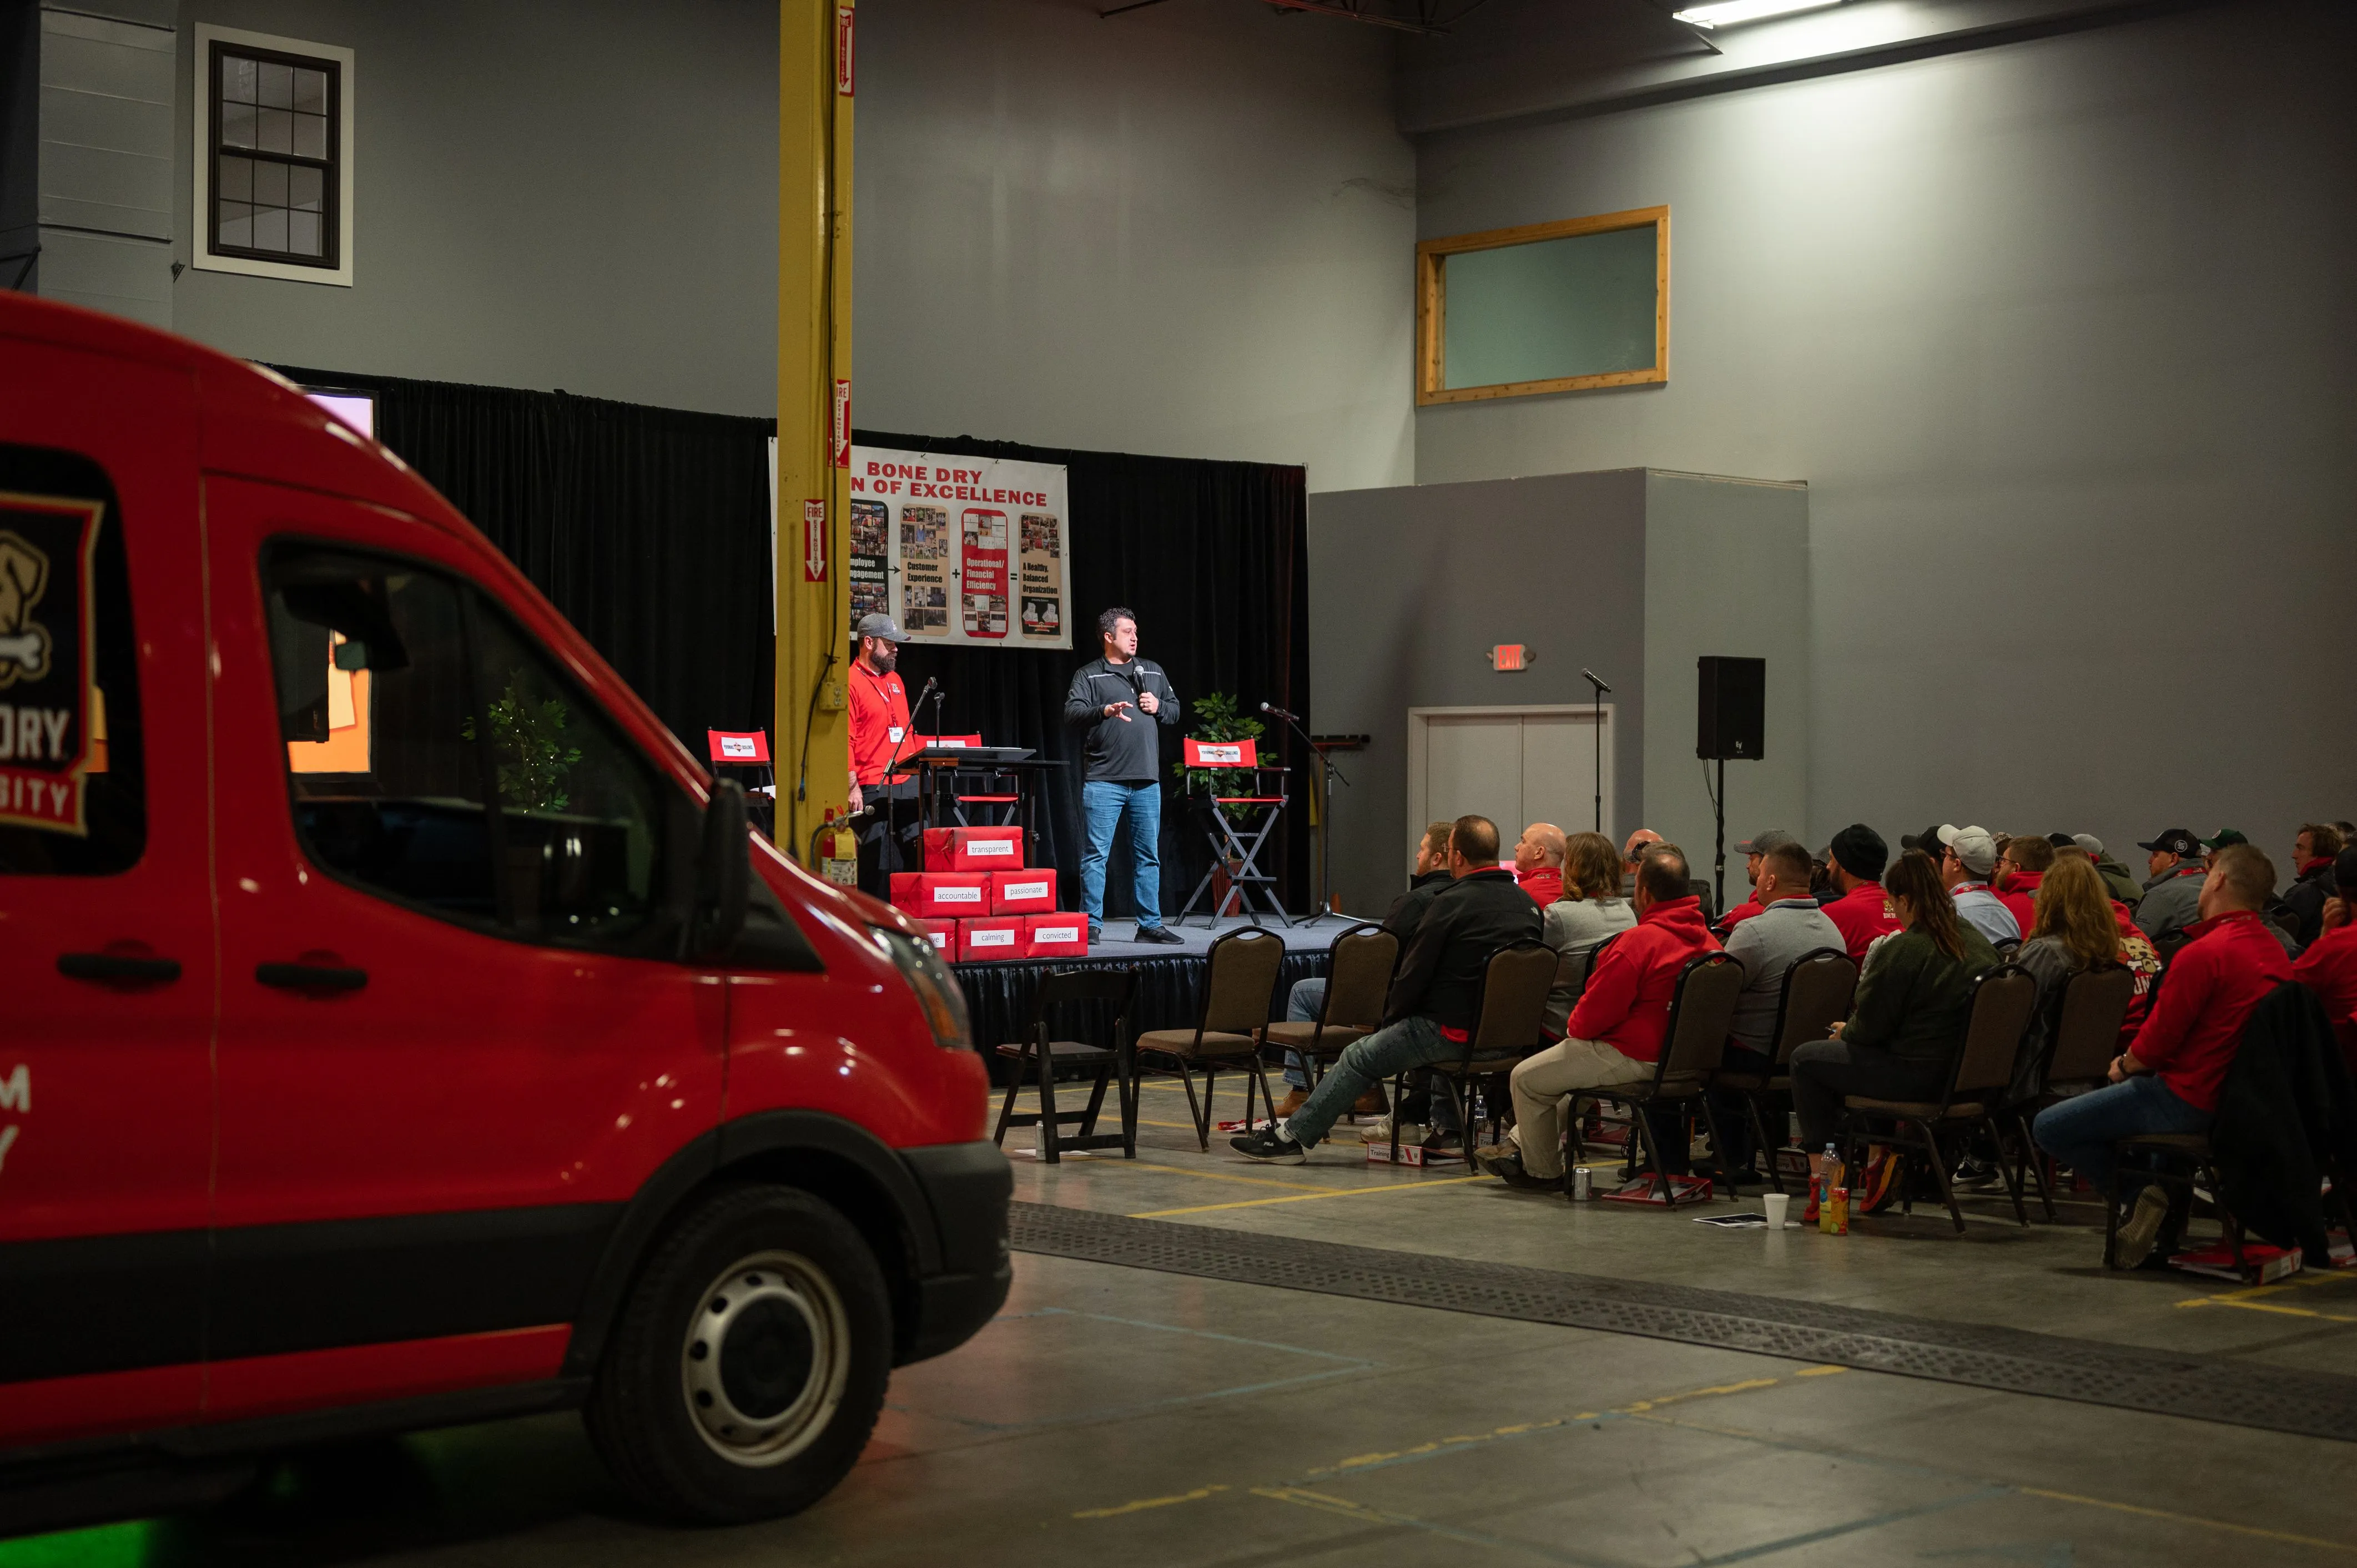 Red van parked indoors with a person speaking on a stage to an audience in the background.